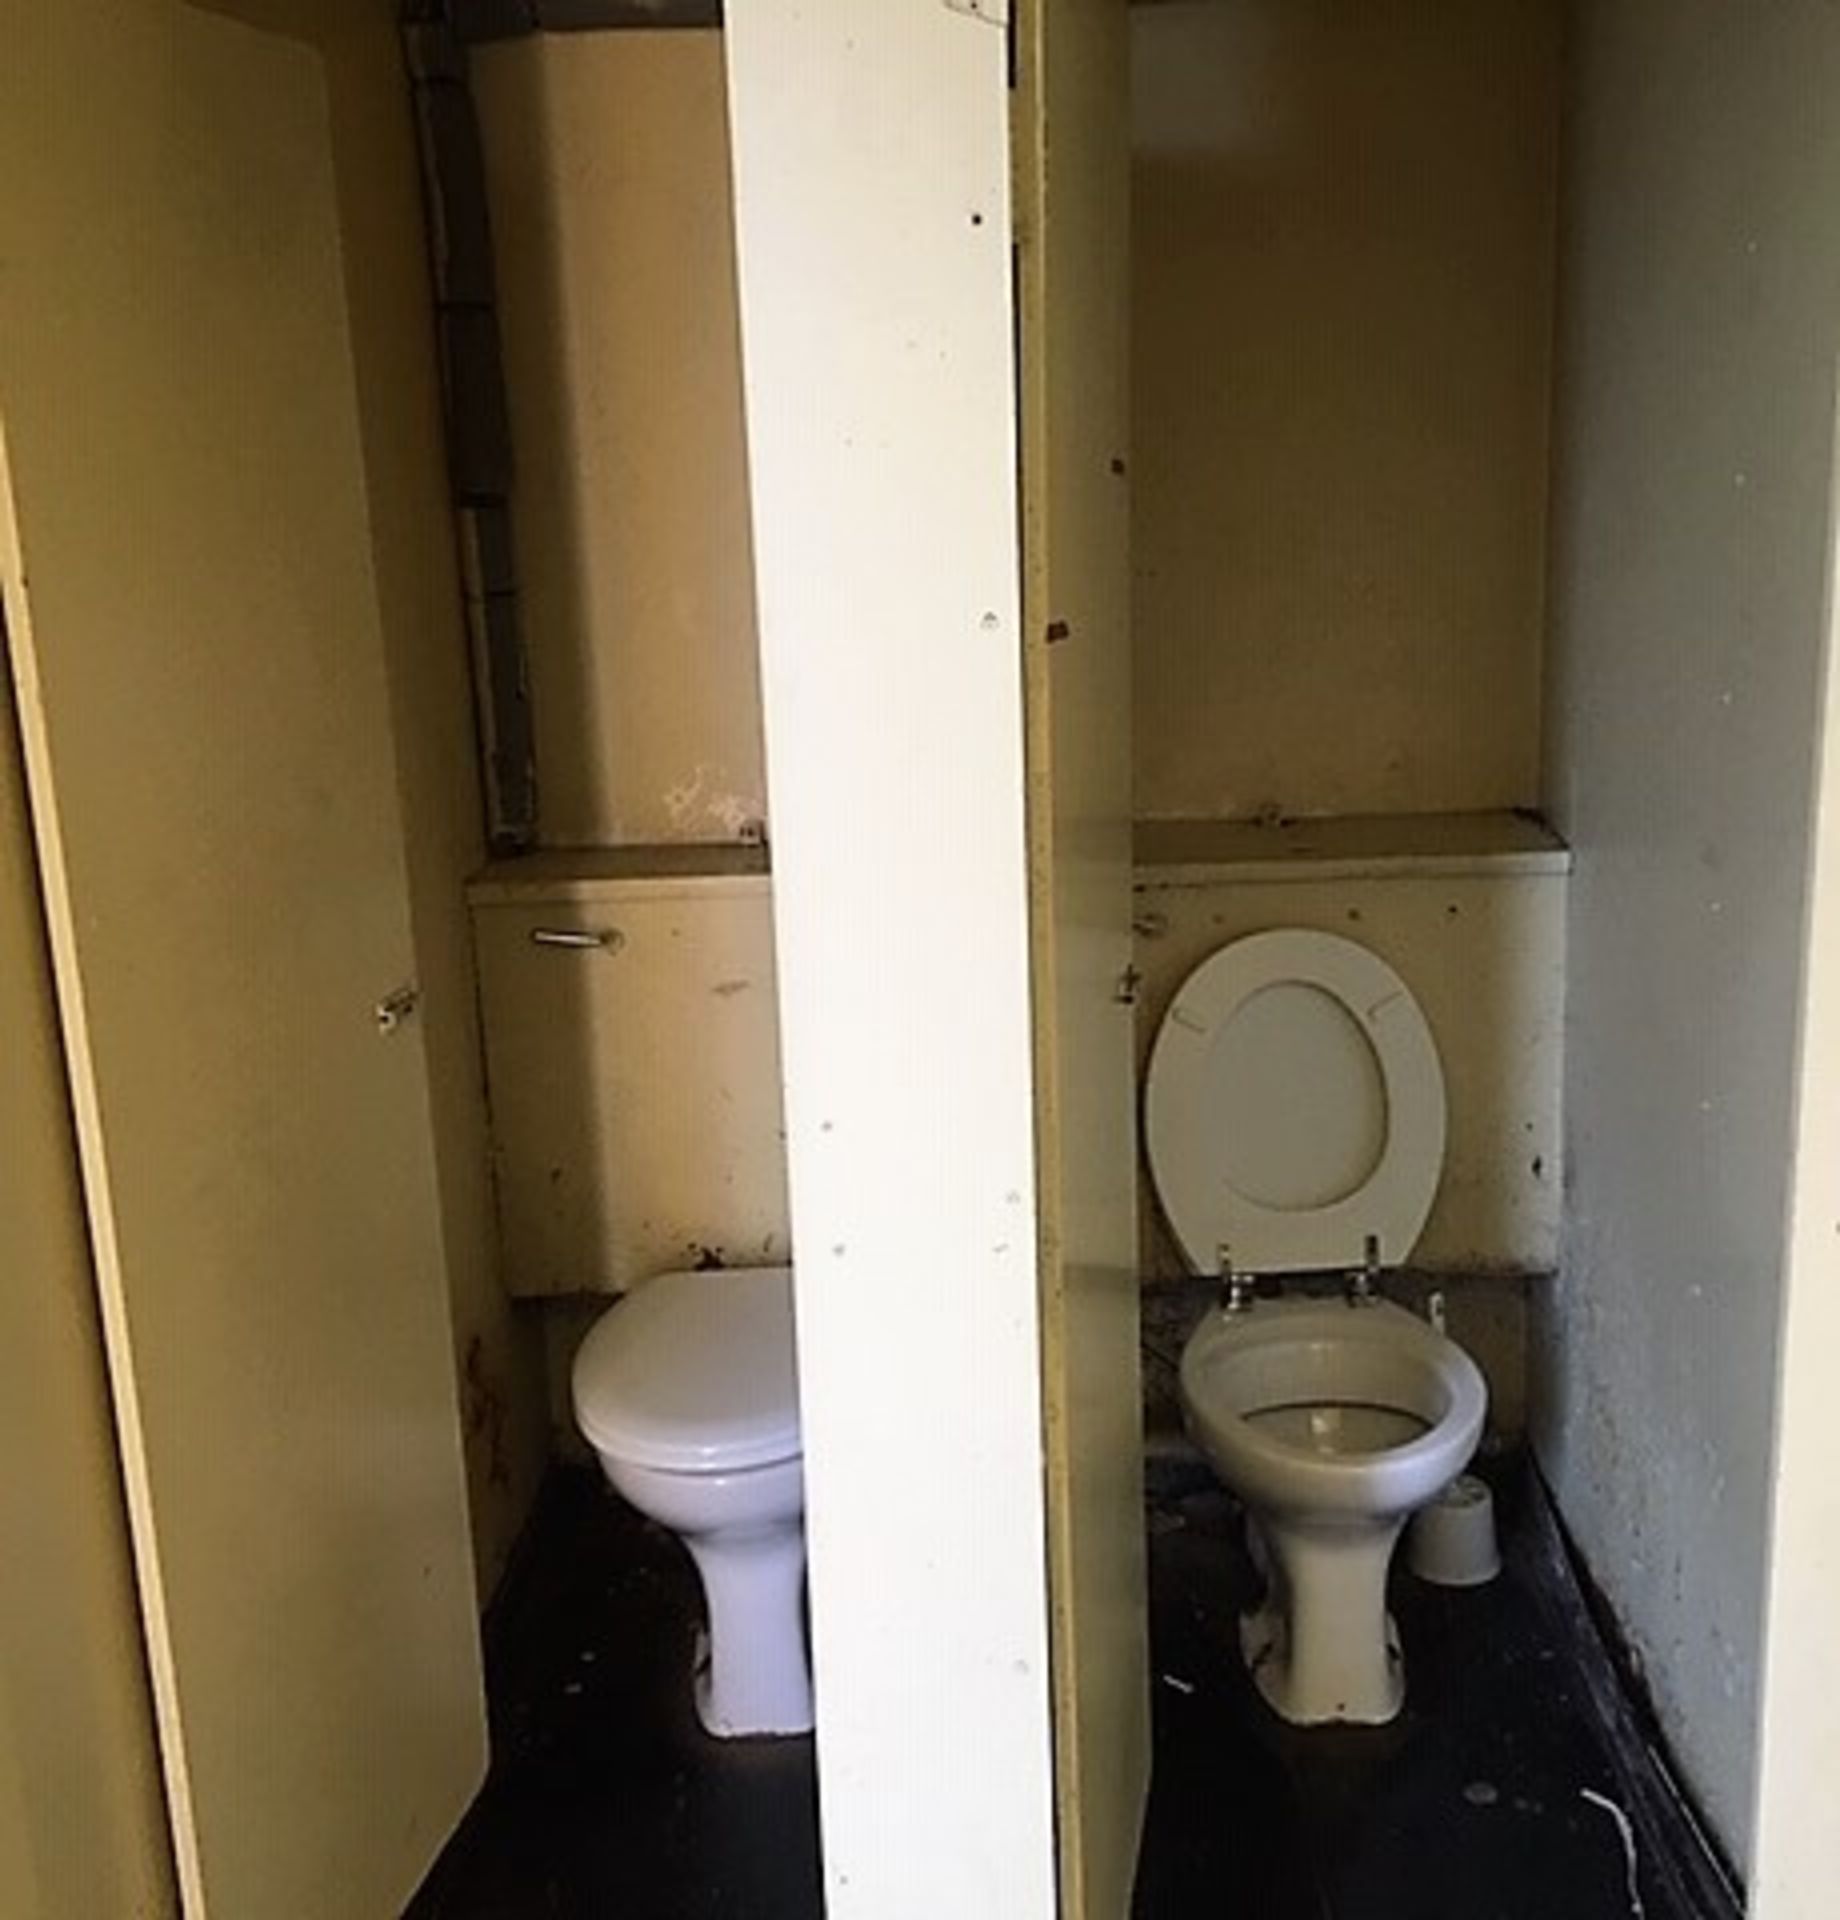 GENTS PORTALOO TOILET BLOCK 32x9 STEEL CHASSIS AND HEAVY DUTY JACKLEGS C/W - EXTERNAL ACCESS STORE - Image 12 of 14